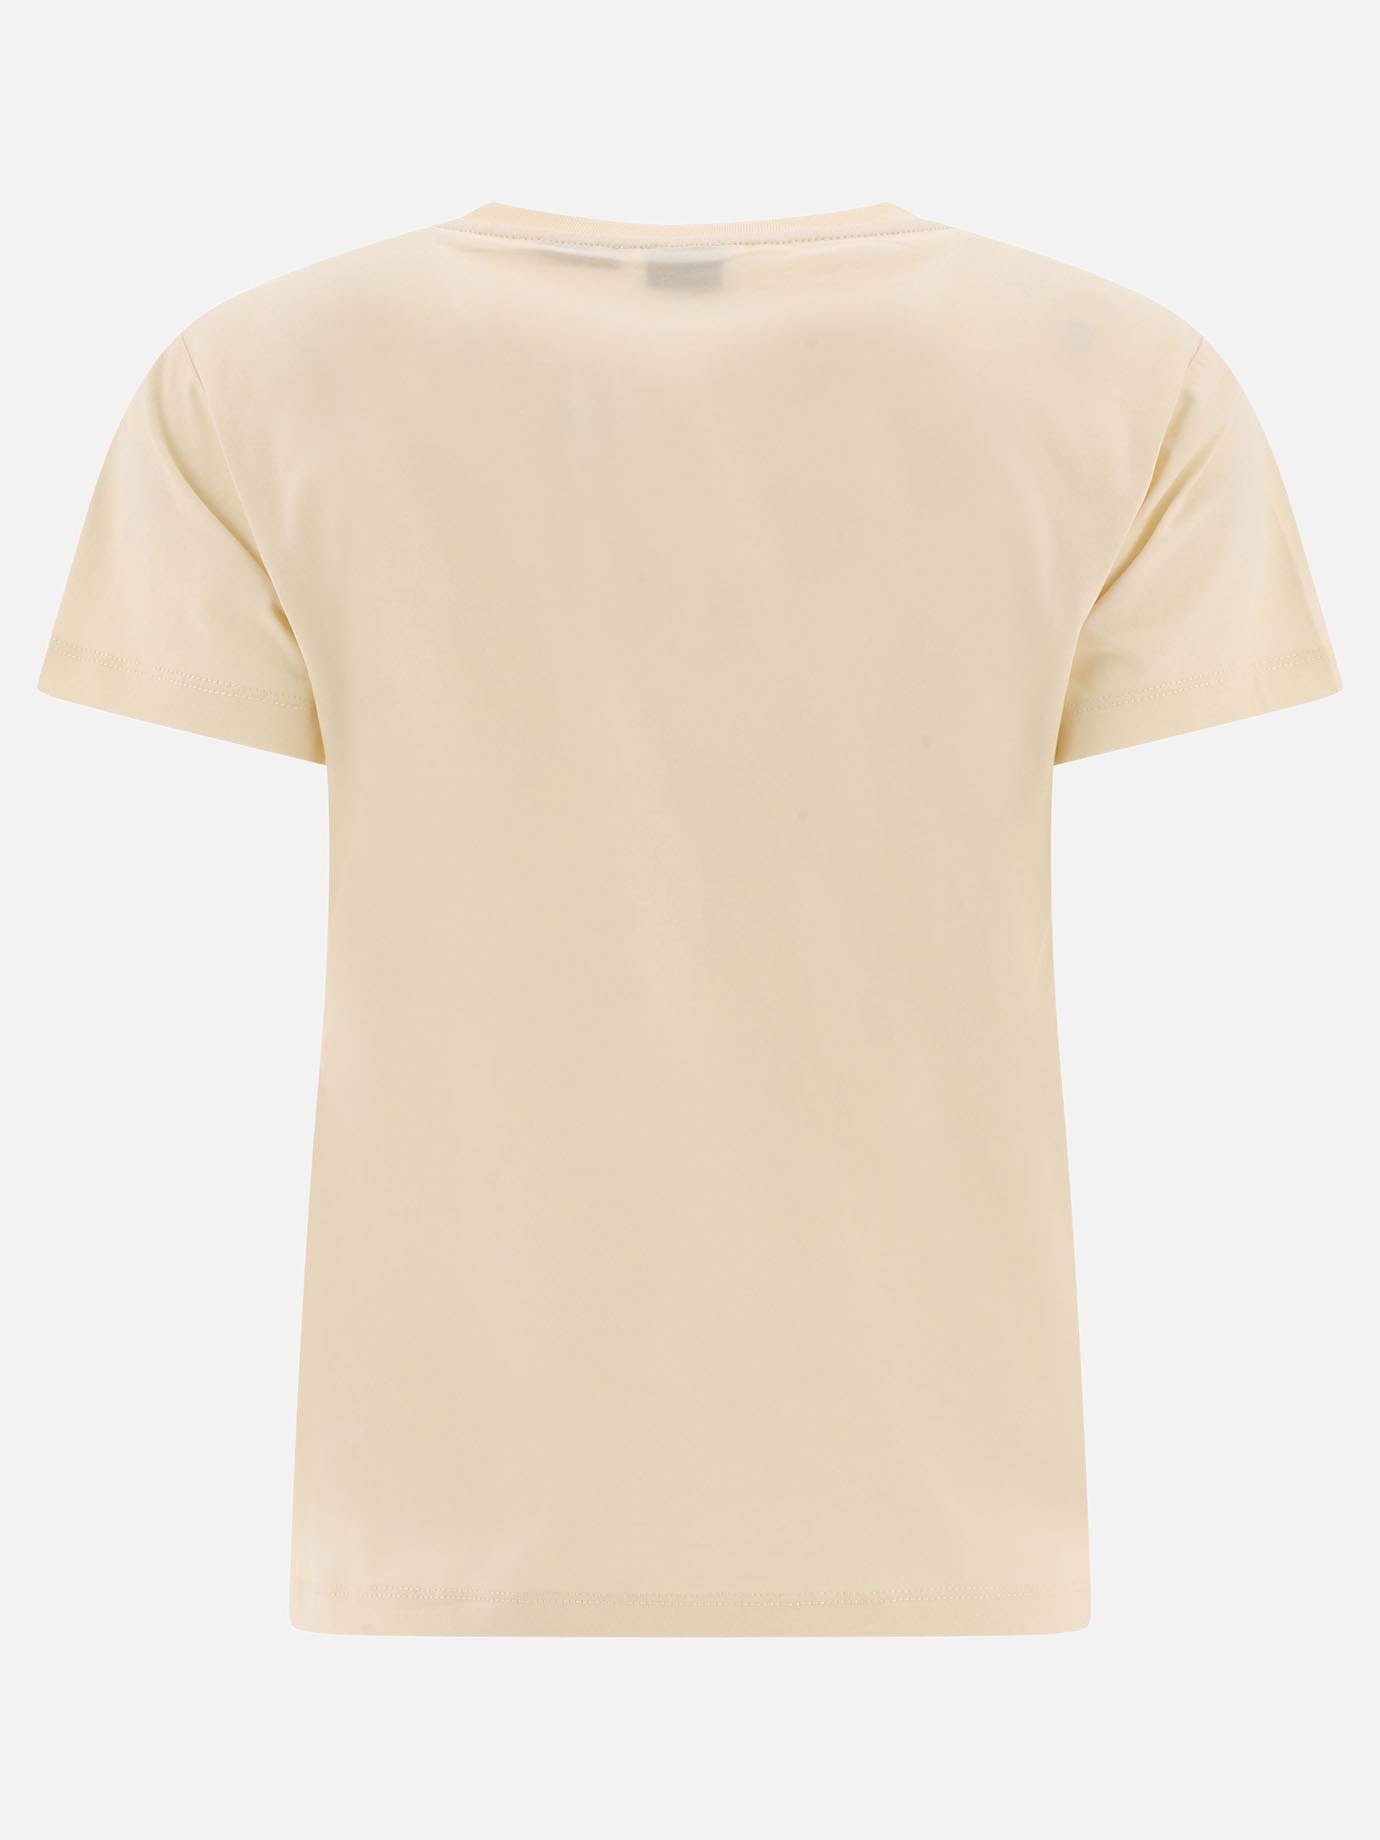  Quentin  t-shirt by Pinko